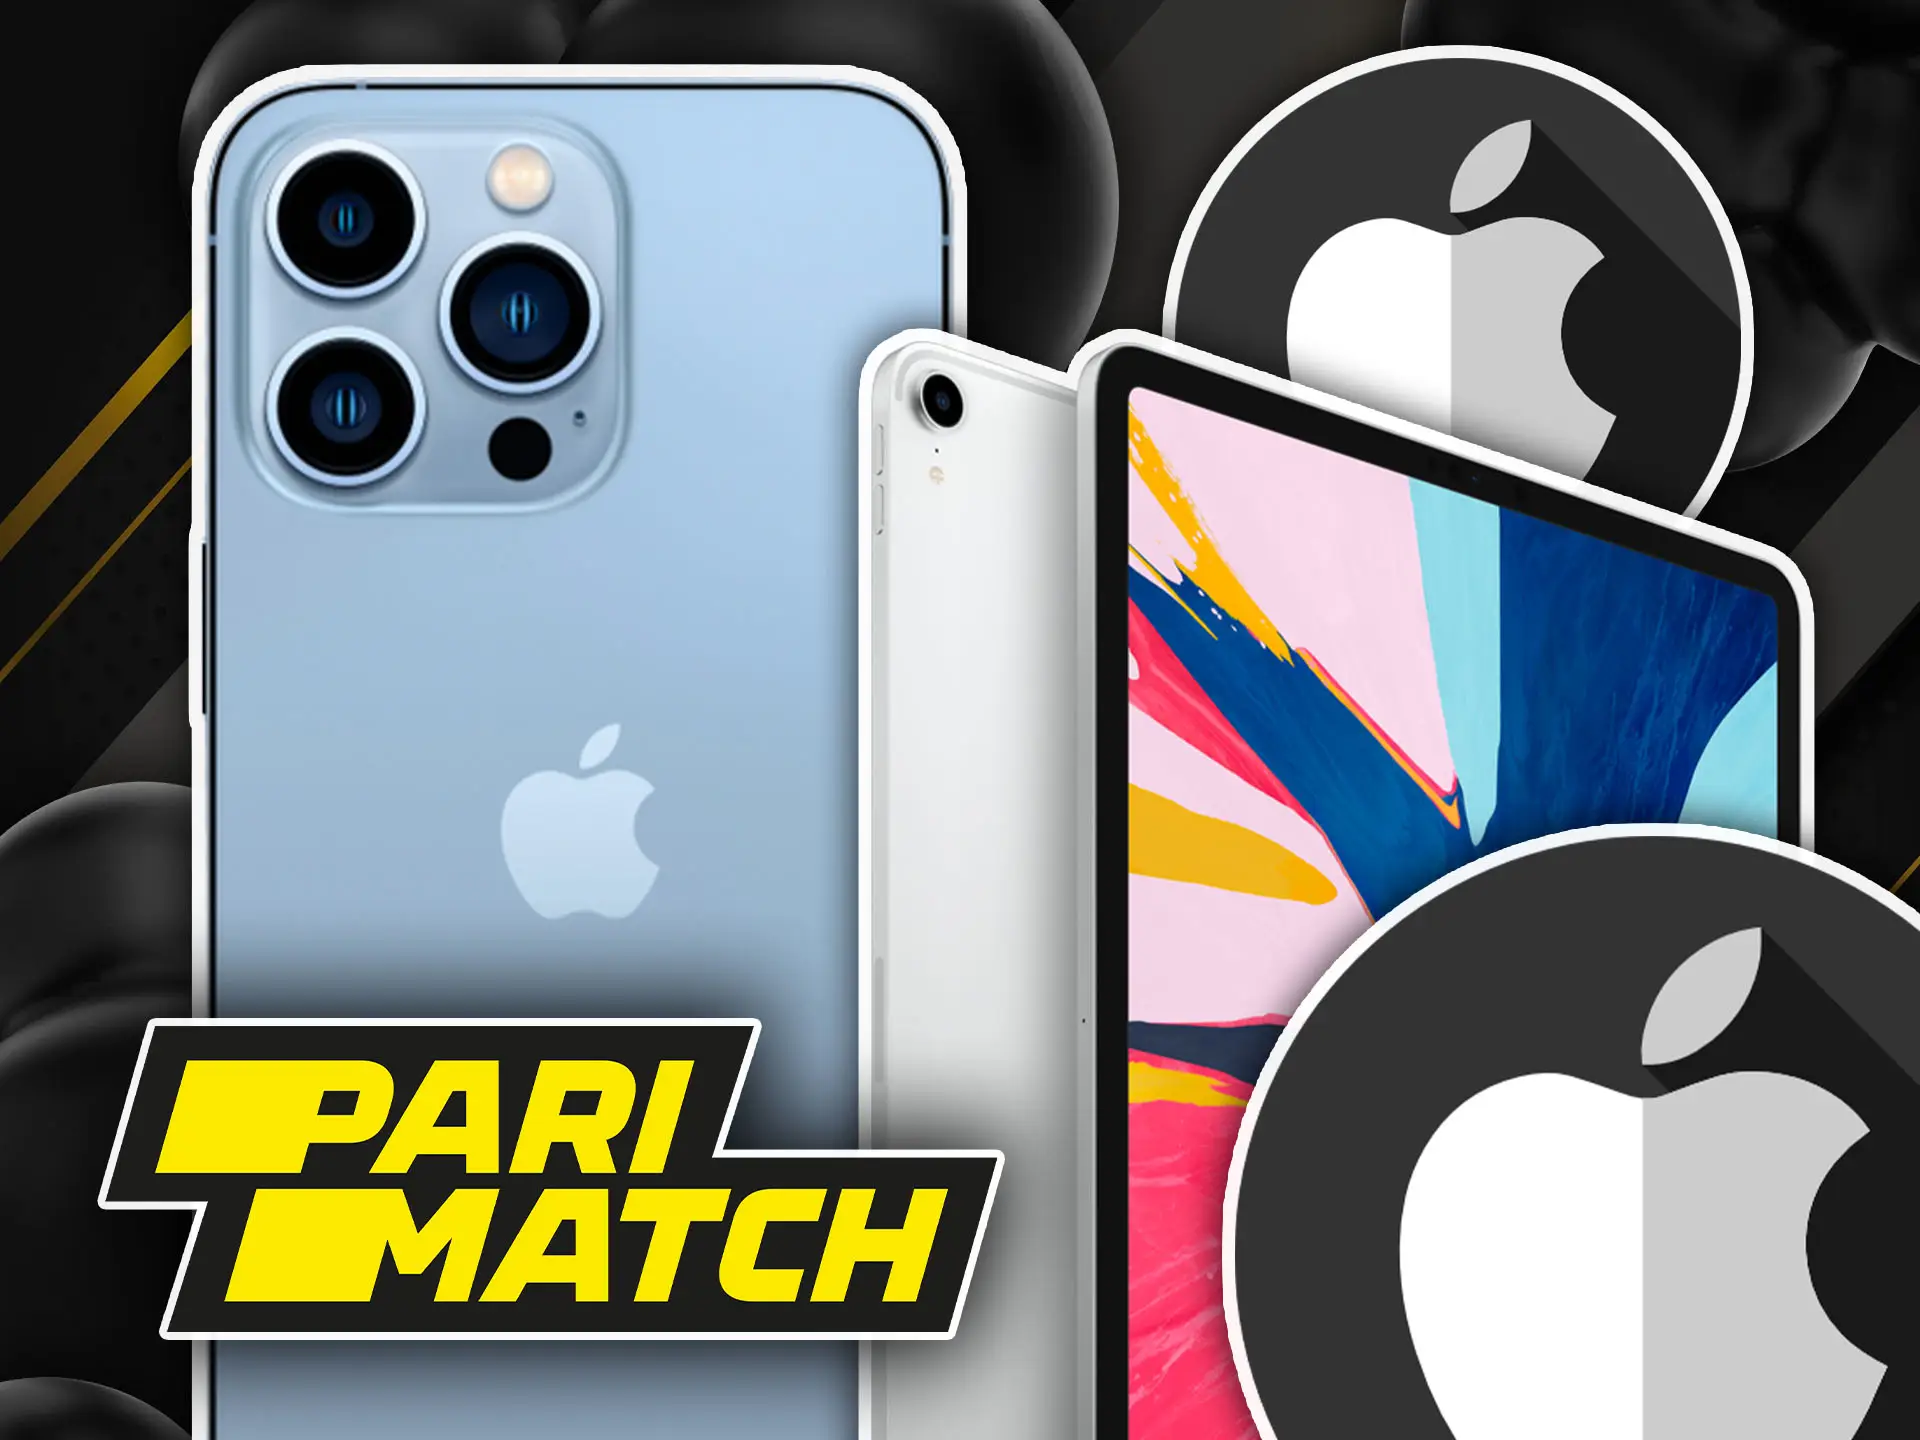 IOS devices for playing Parimatch for India.